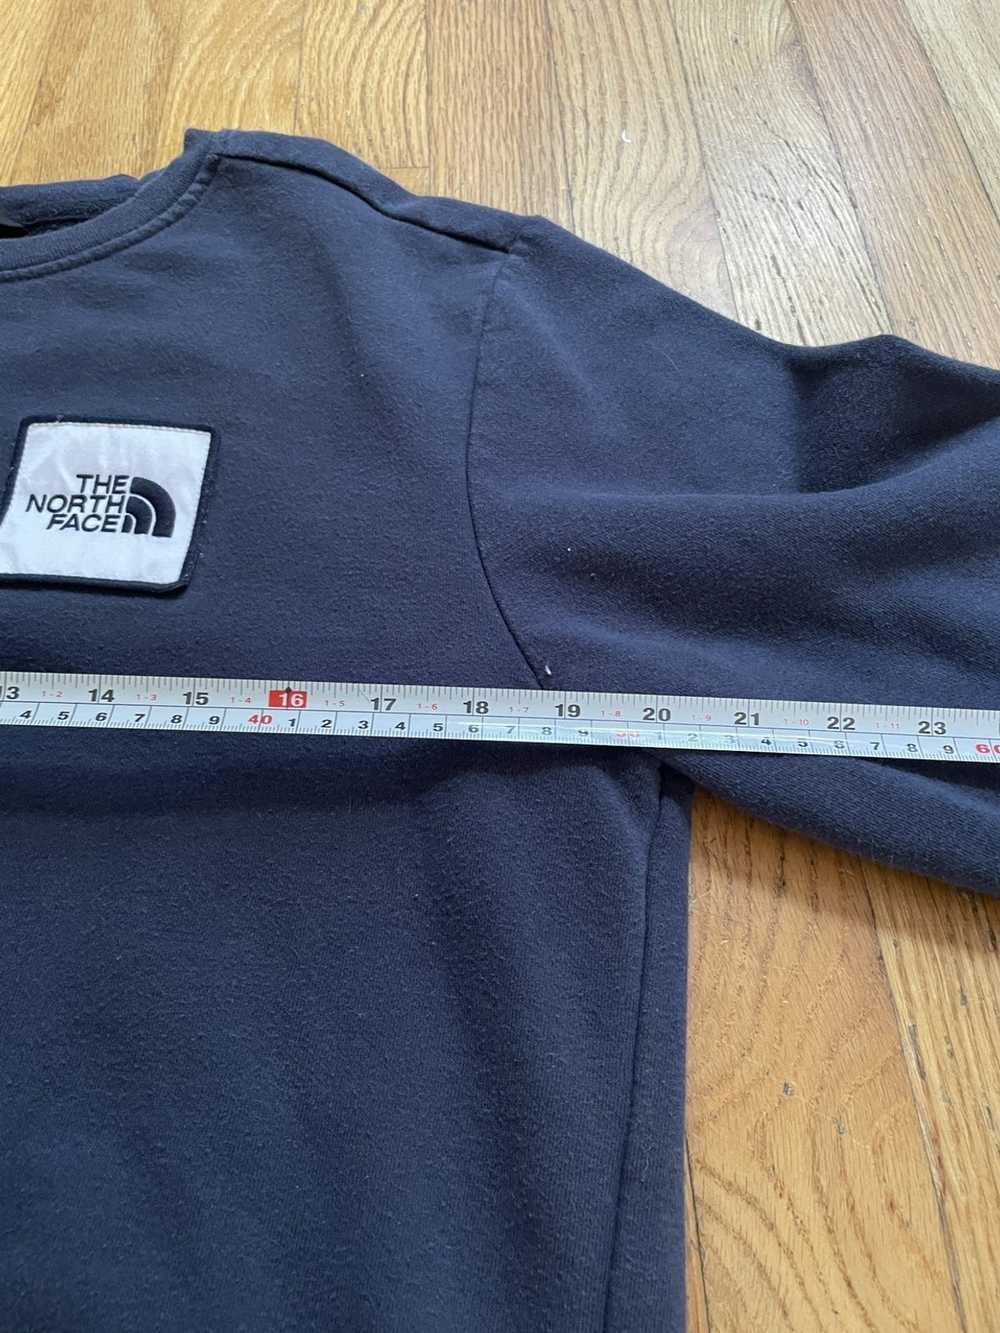 The North Face The North Face patch crewneck - image 4